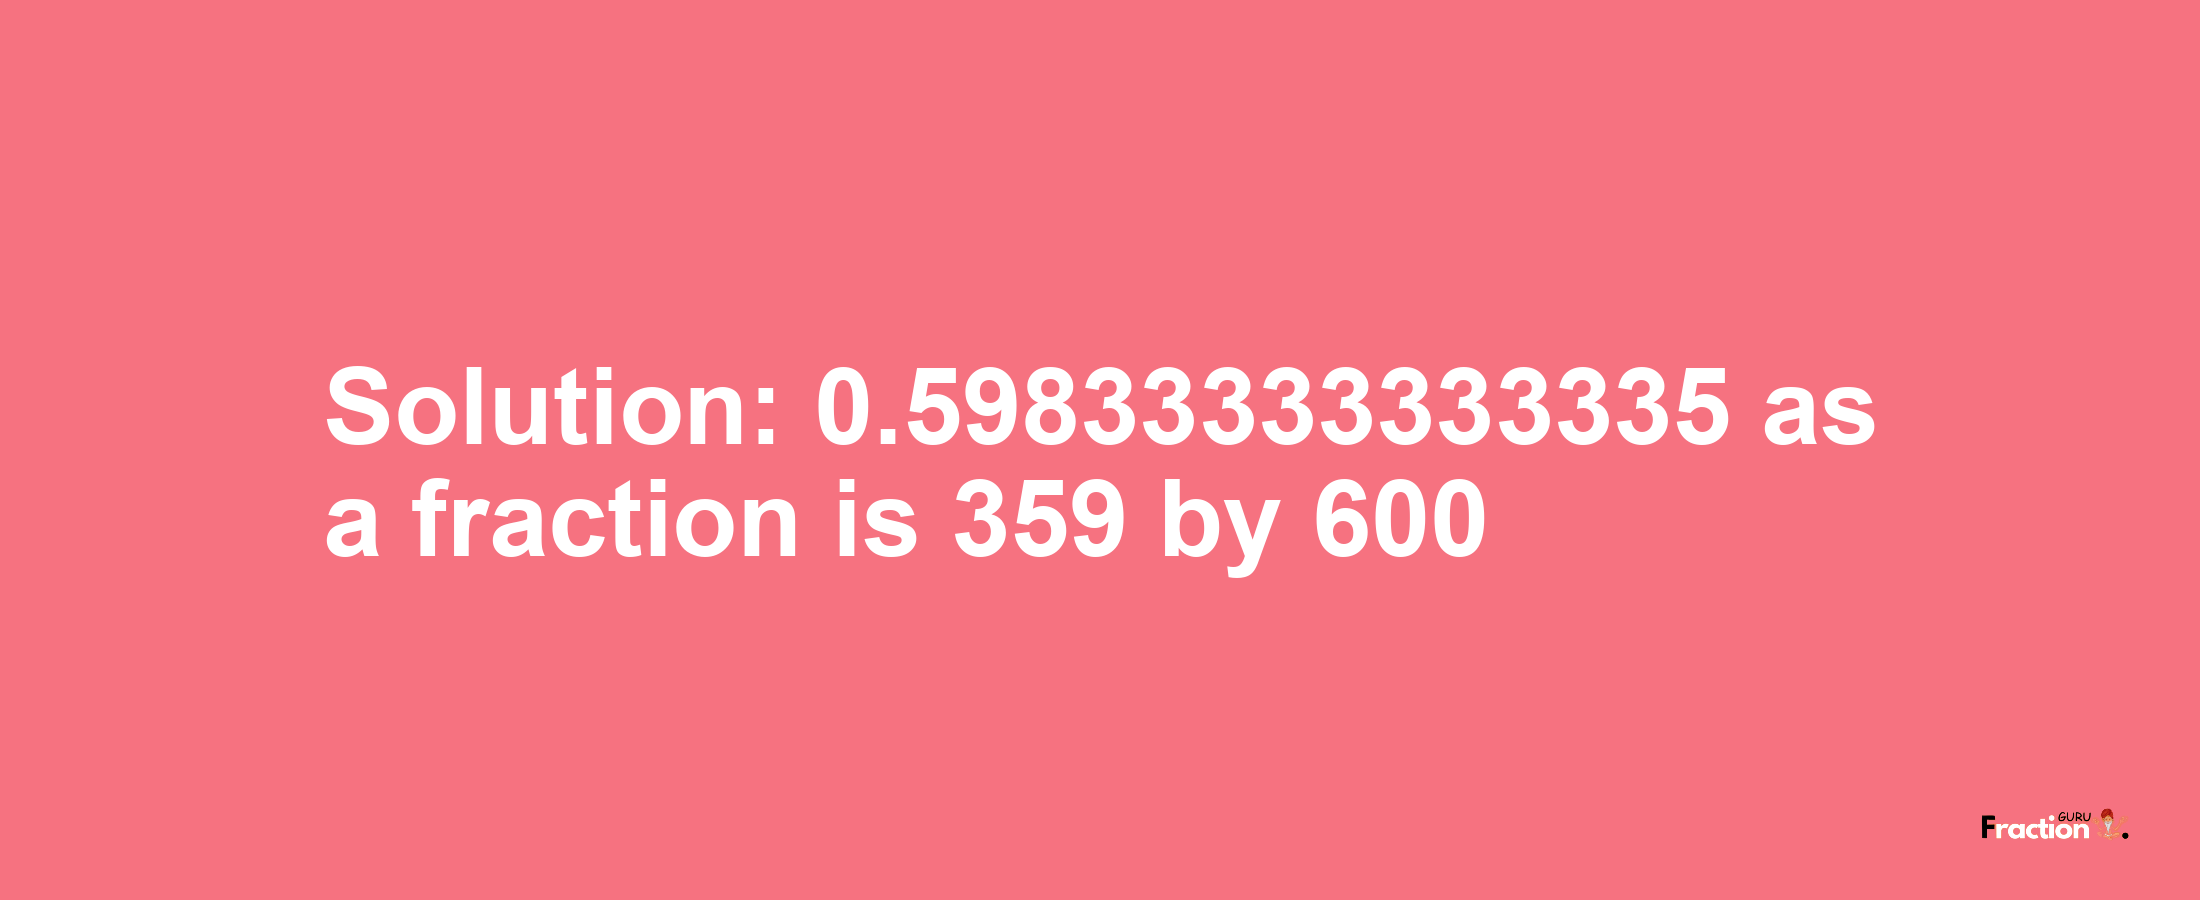 Solution:0.59833333333335 as a fraction is 359/600